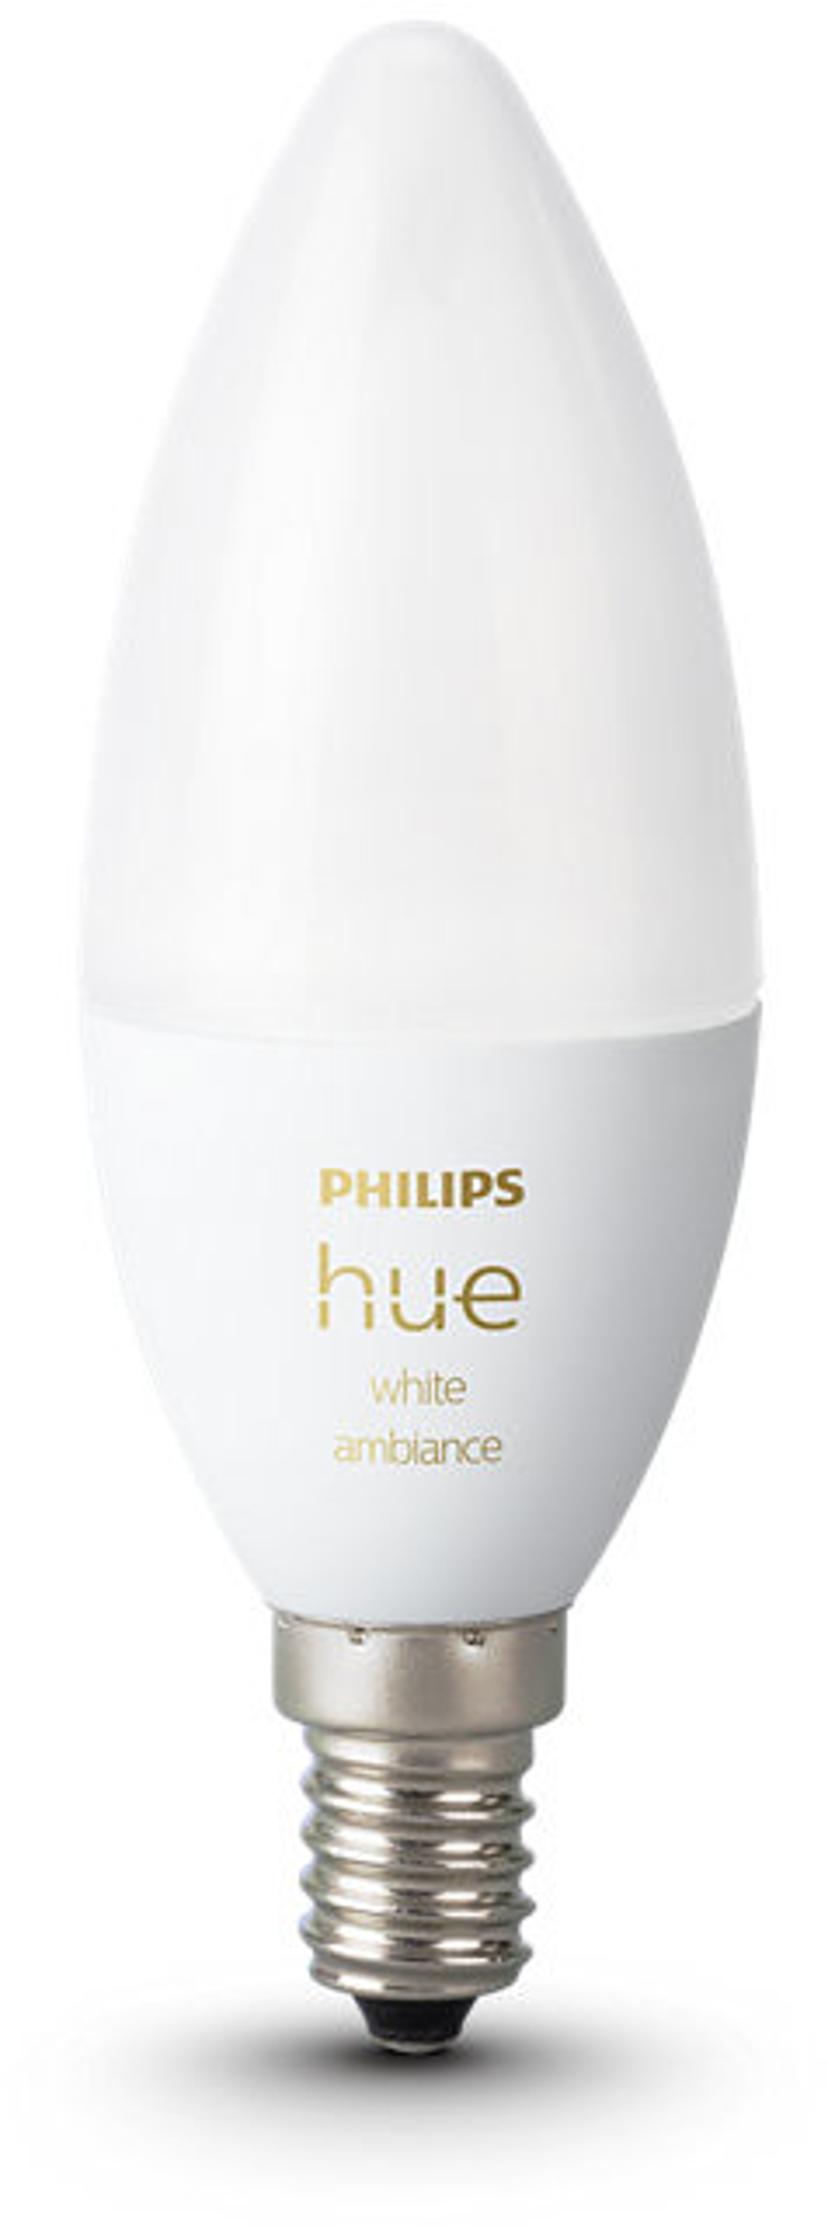 Philips Hue White Ambiance 6W E14 BT 2-pack